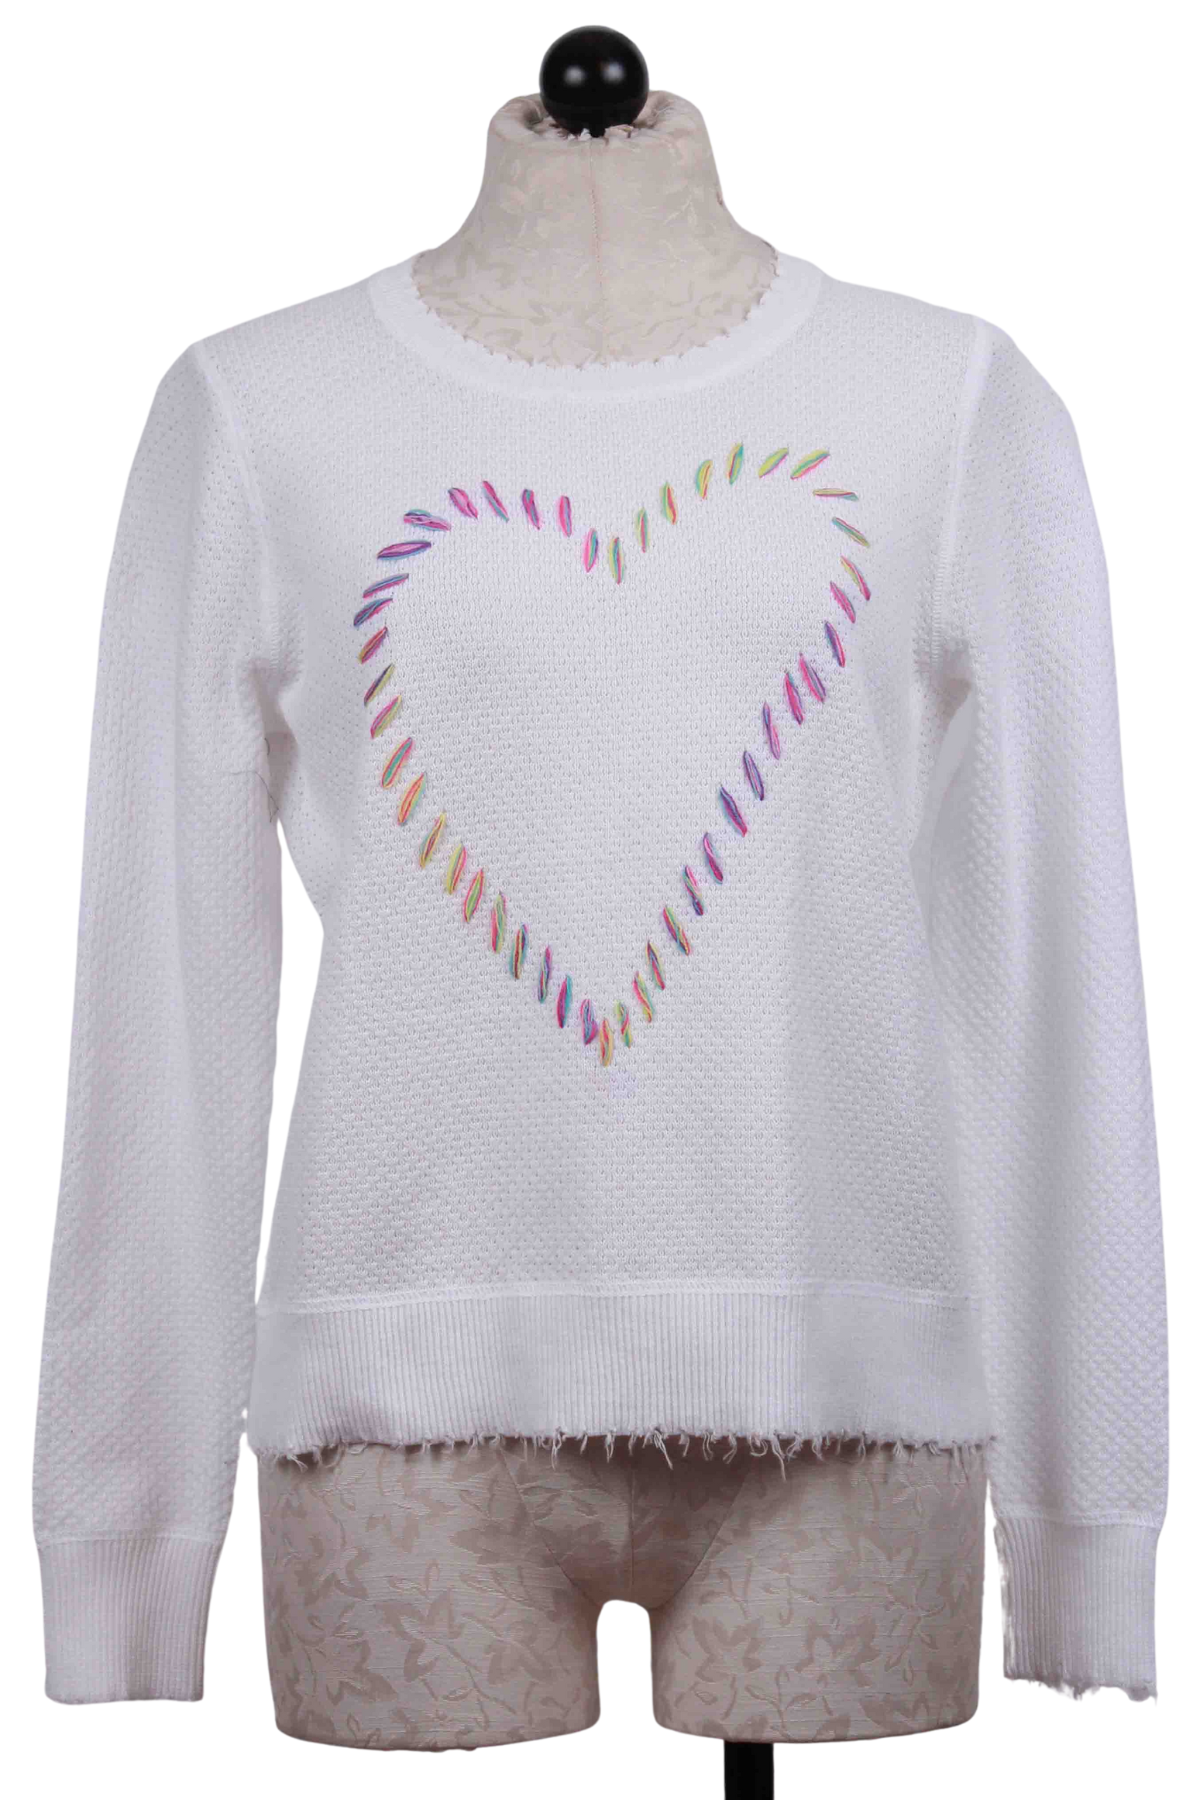 White Love Craft Sweater by Lisa Todd